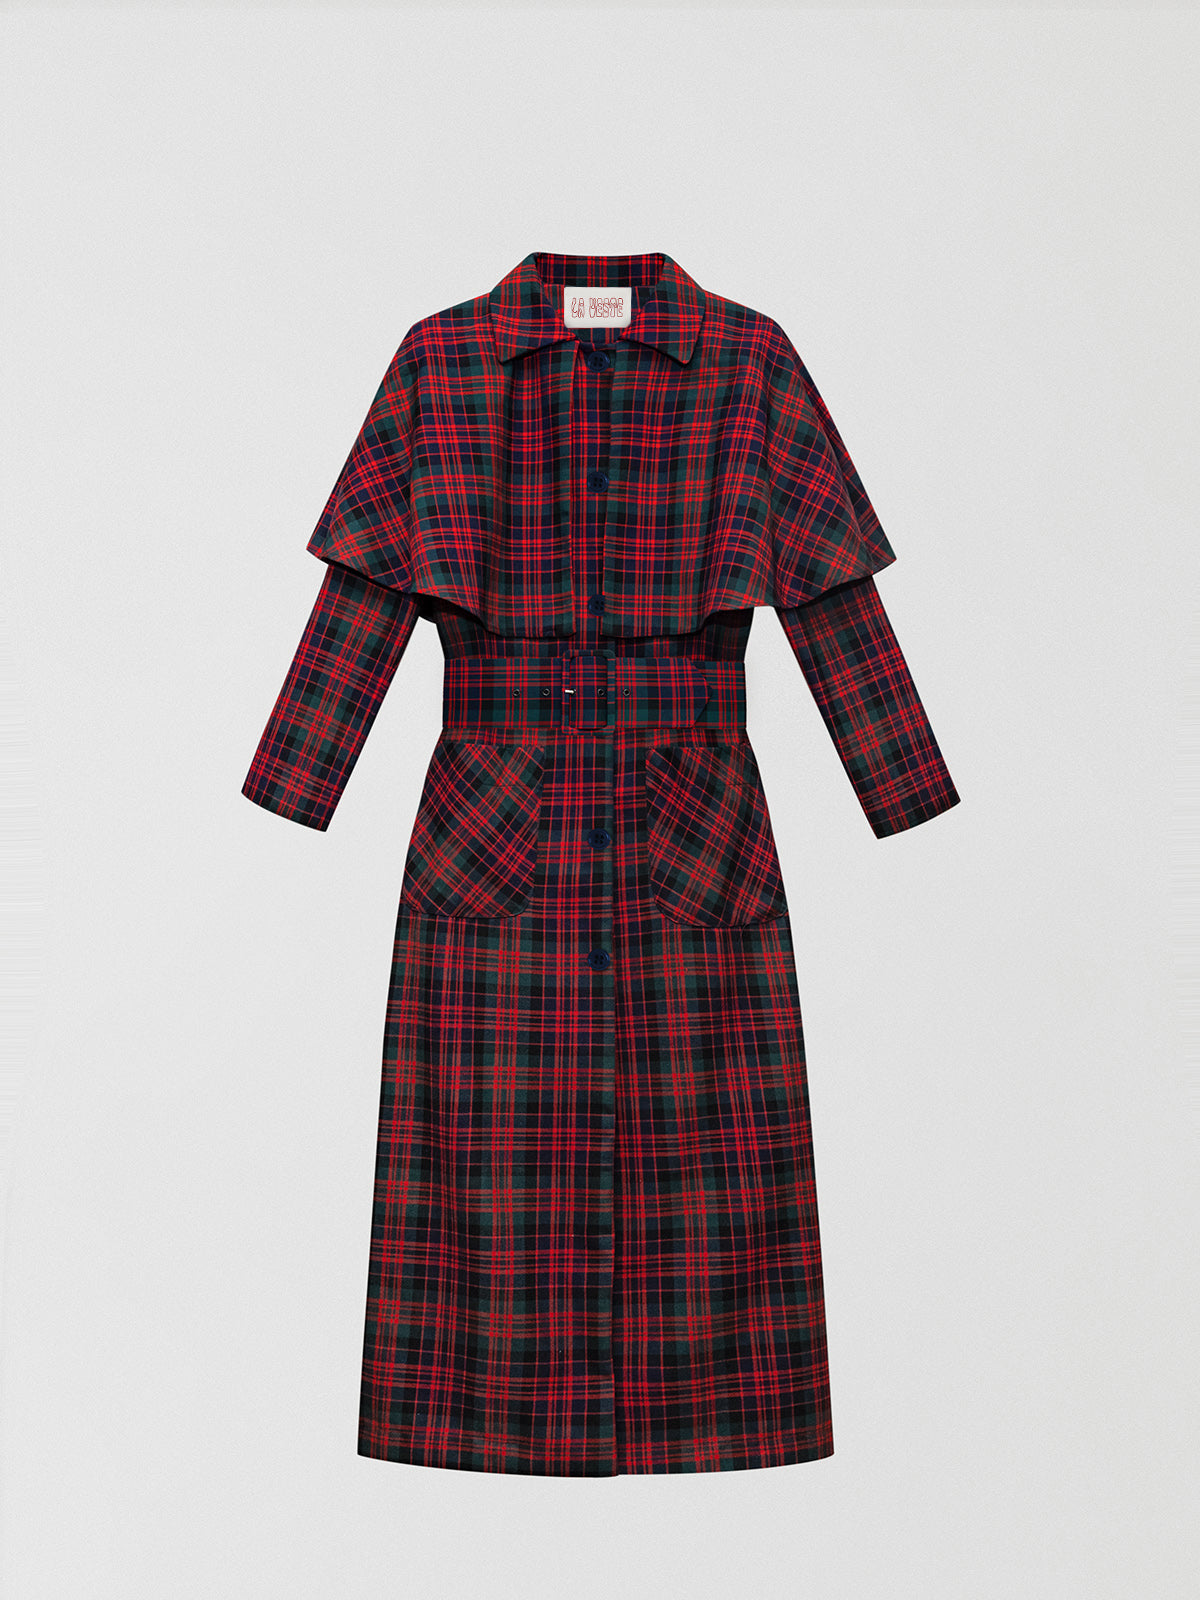 Wool gabardine with check pattern in red, navy and green tones and belt lined in the same fabric